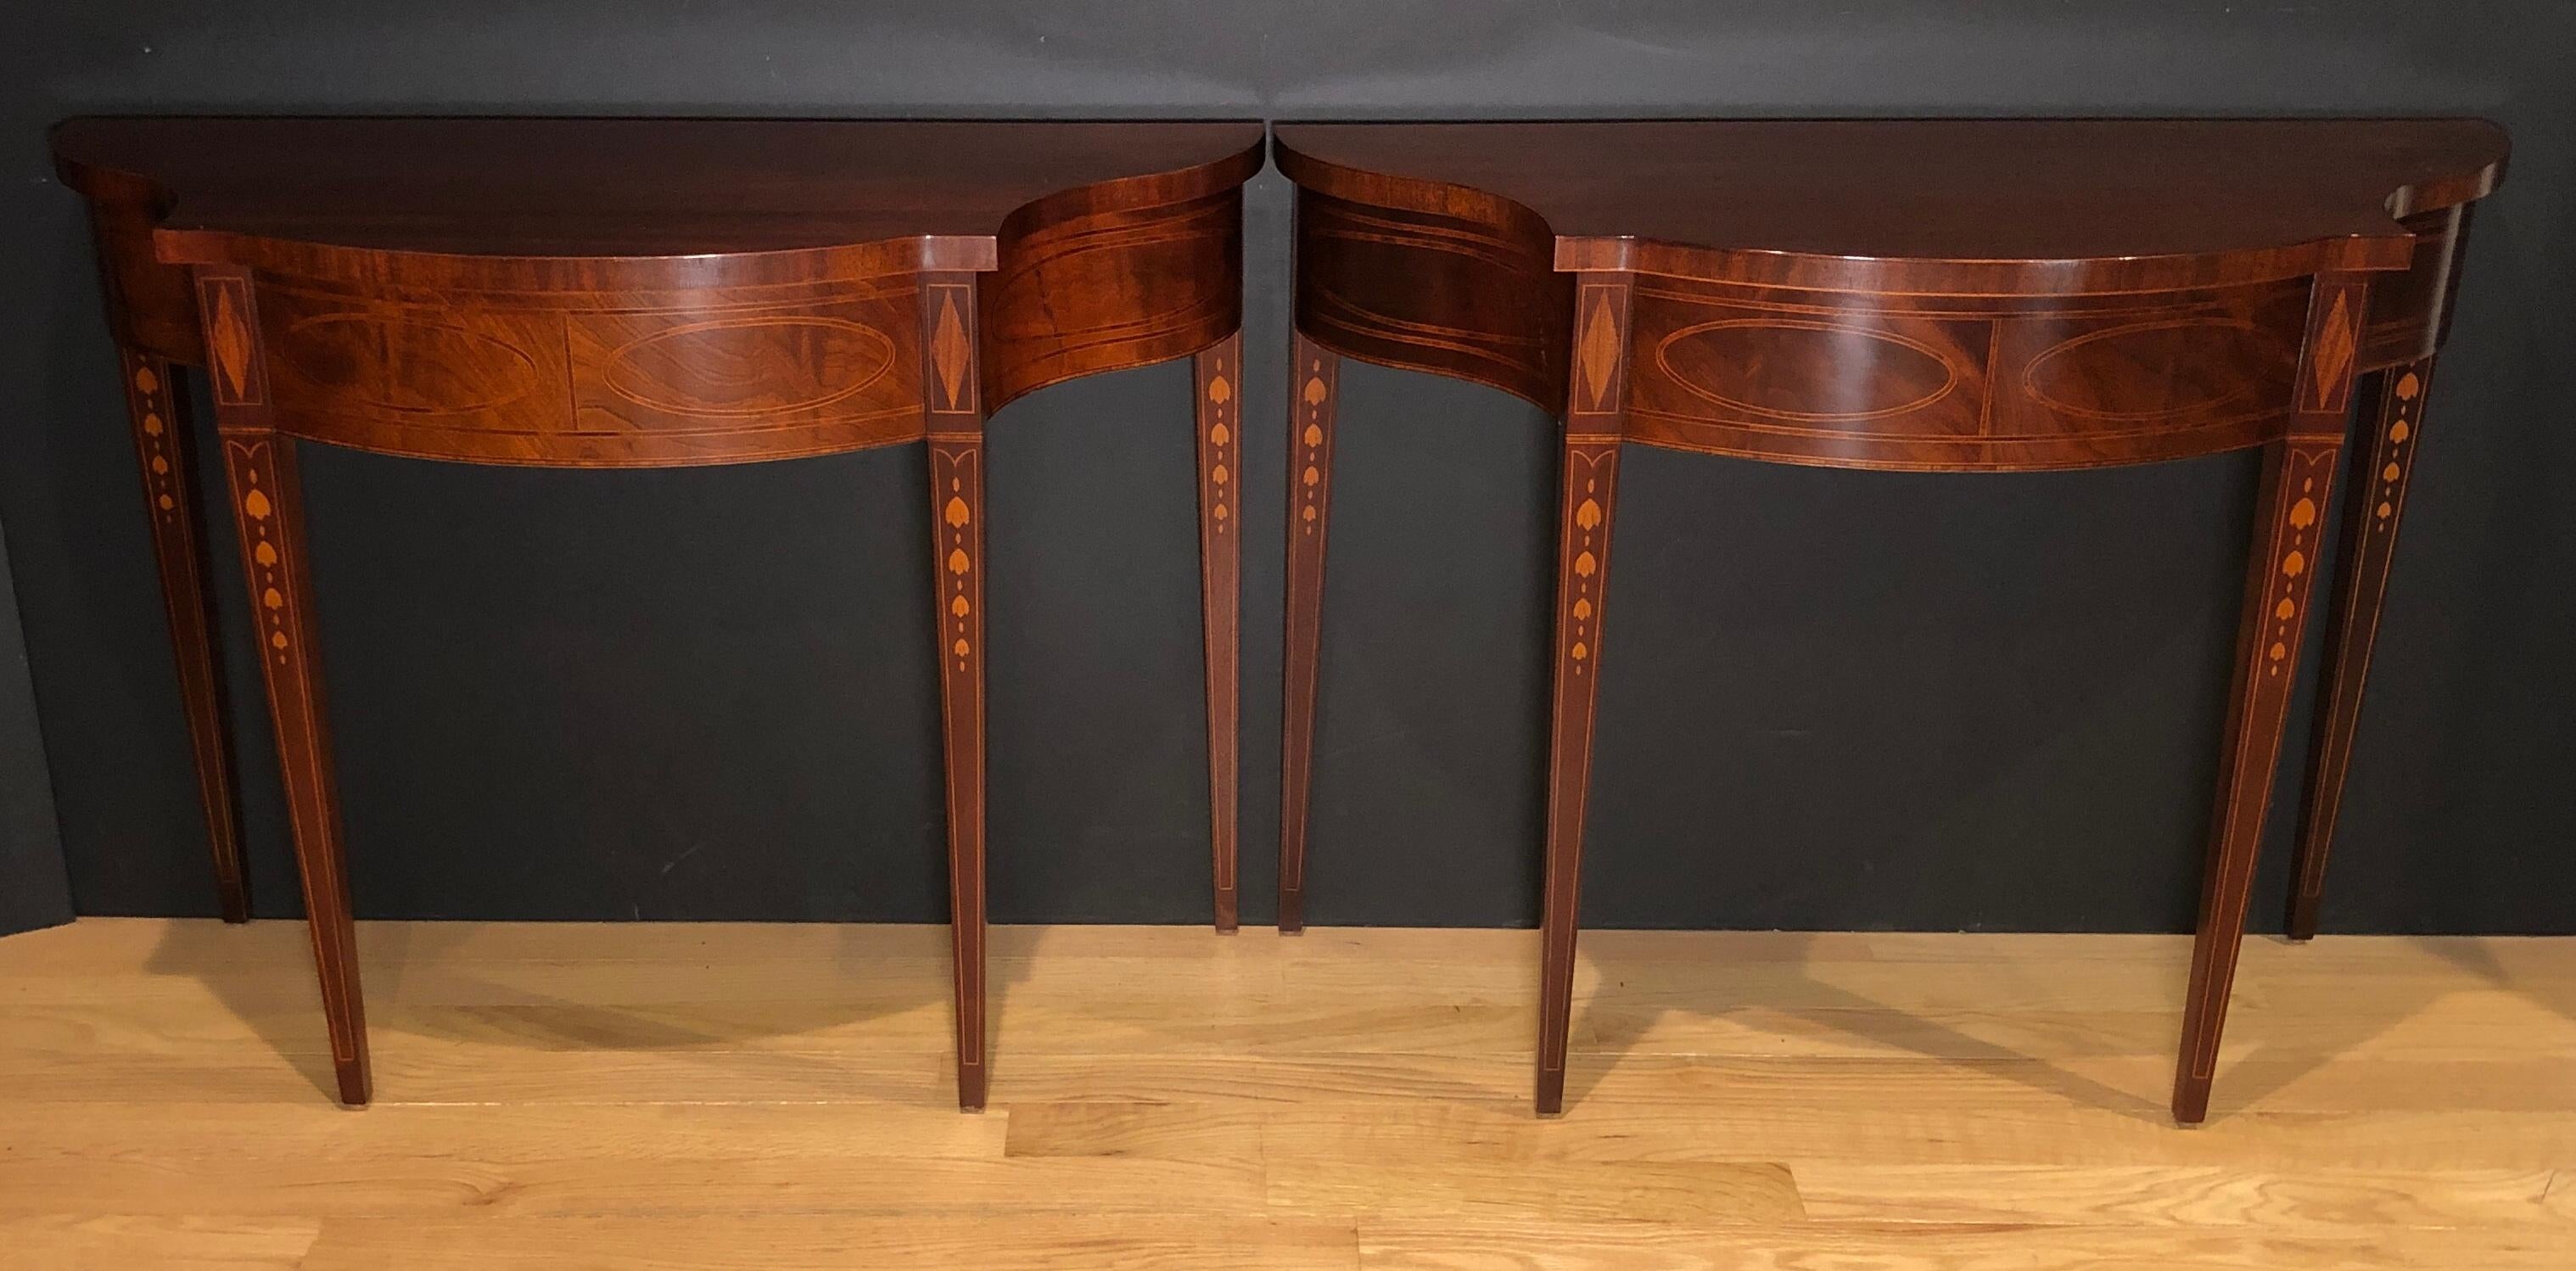 Inlay Pair of Historic Charleston Demilune Console Tables by Baker